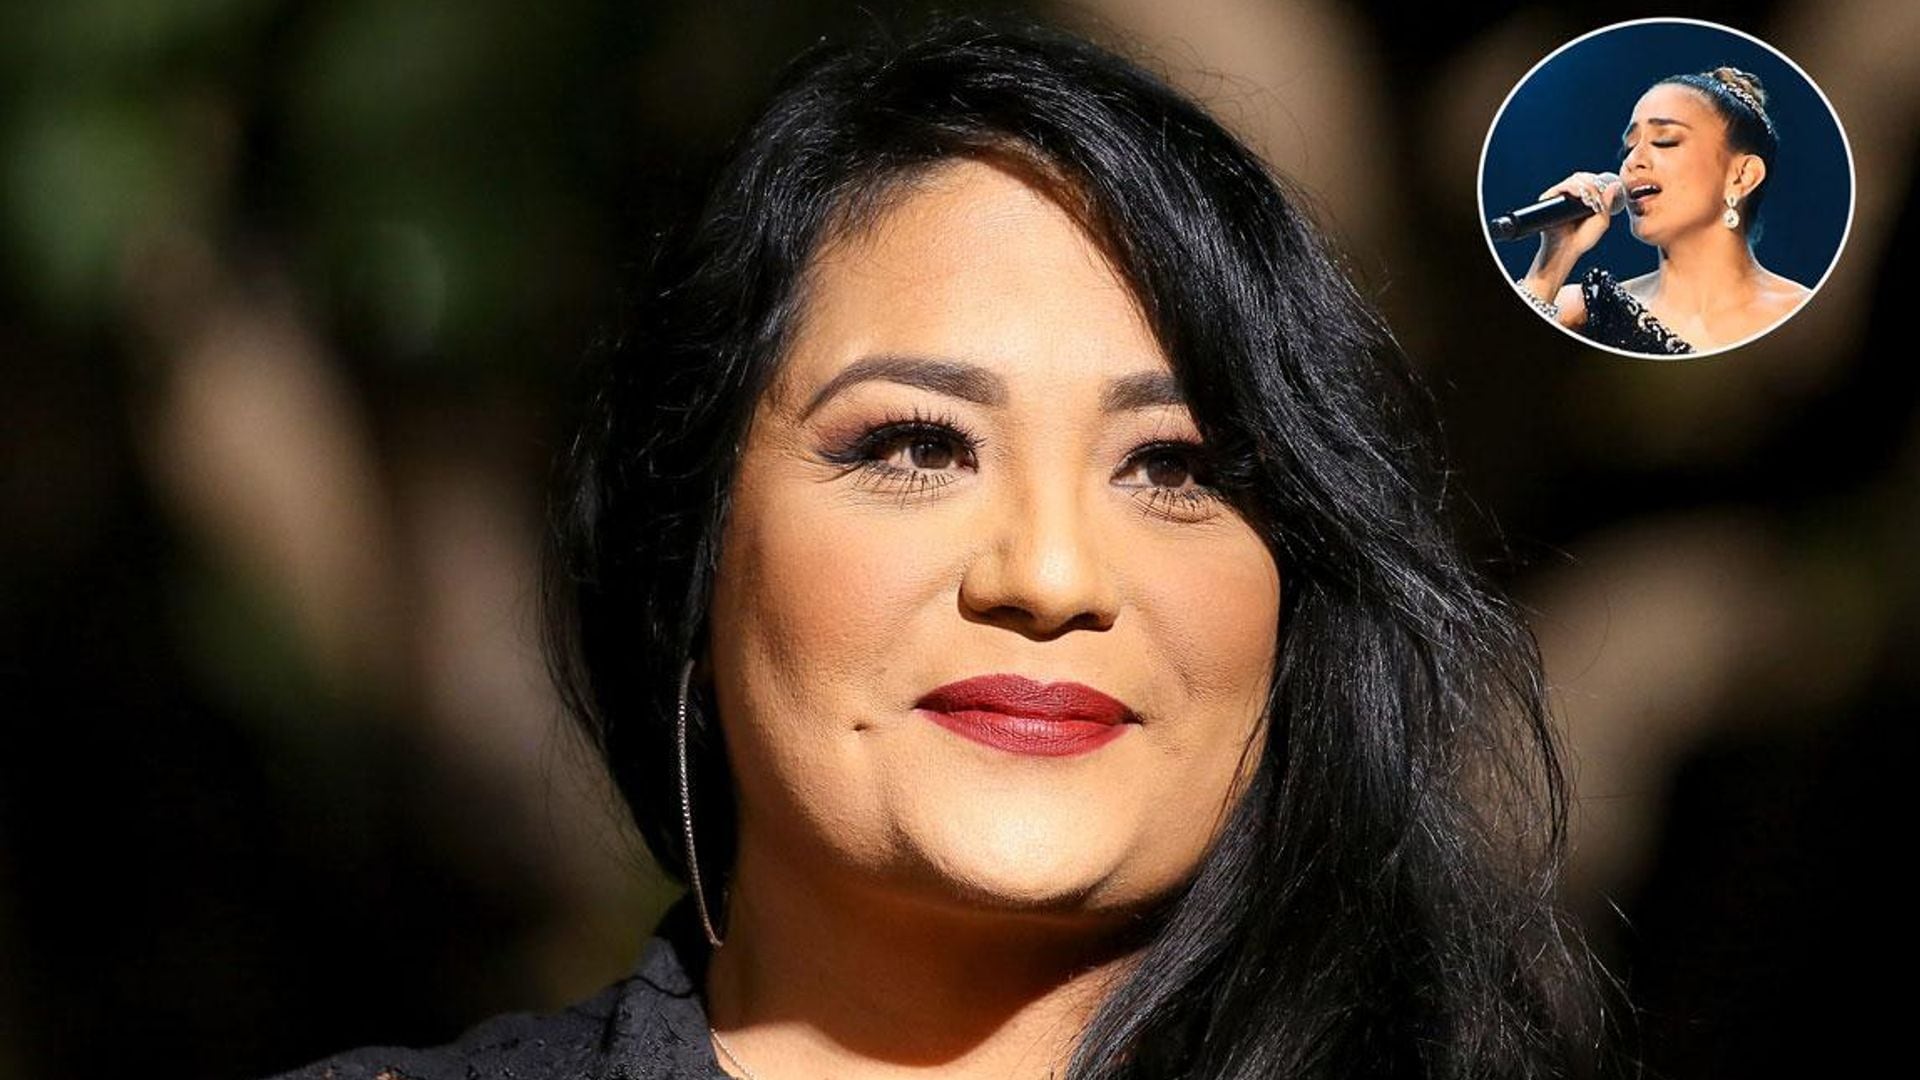 Selena Quintanilla’s sister Suzette reacts to Ally Brooke’s Miss Universe tribute